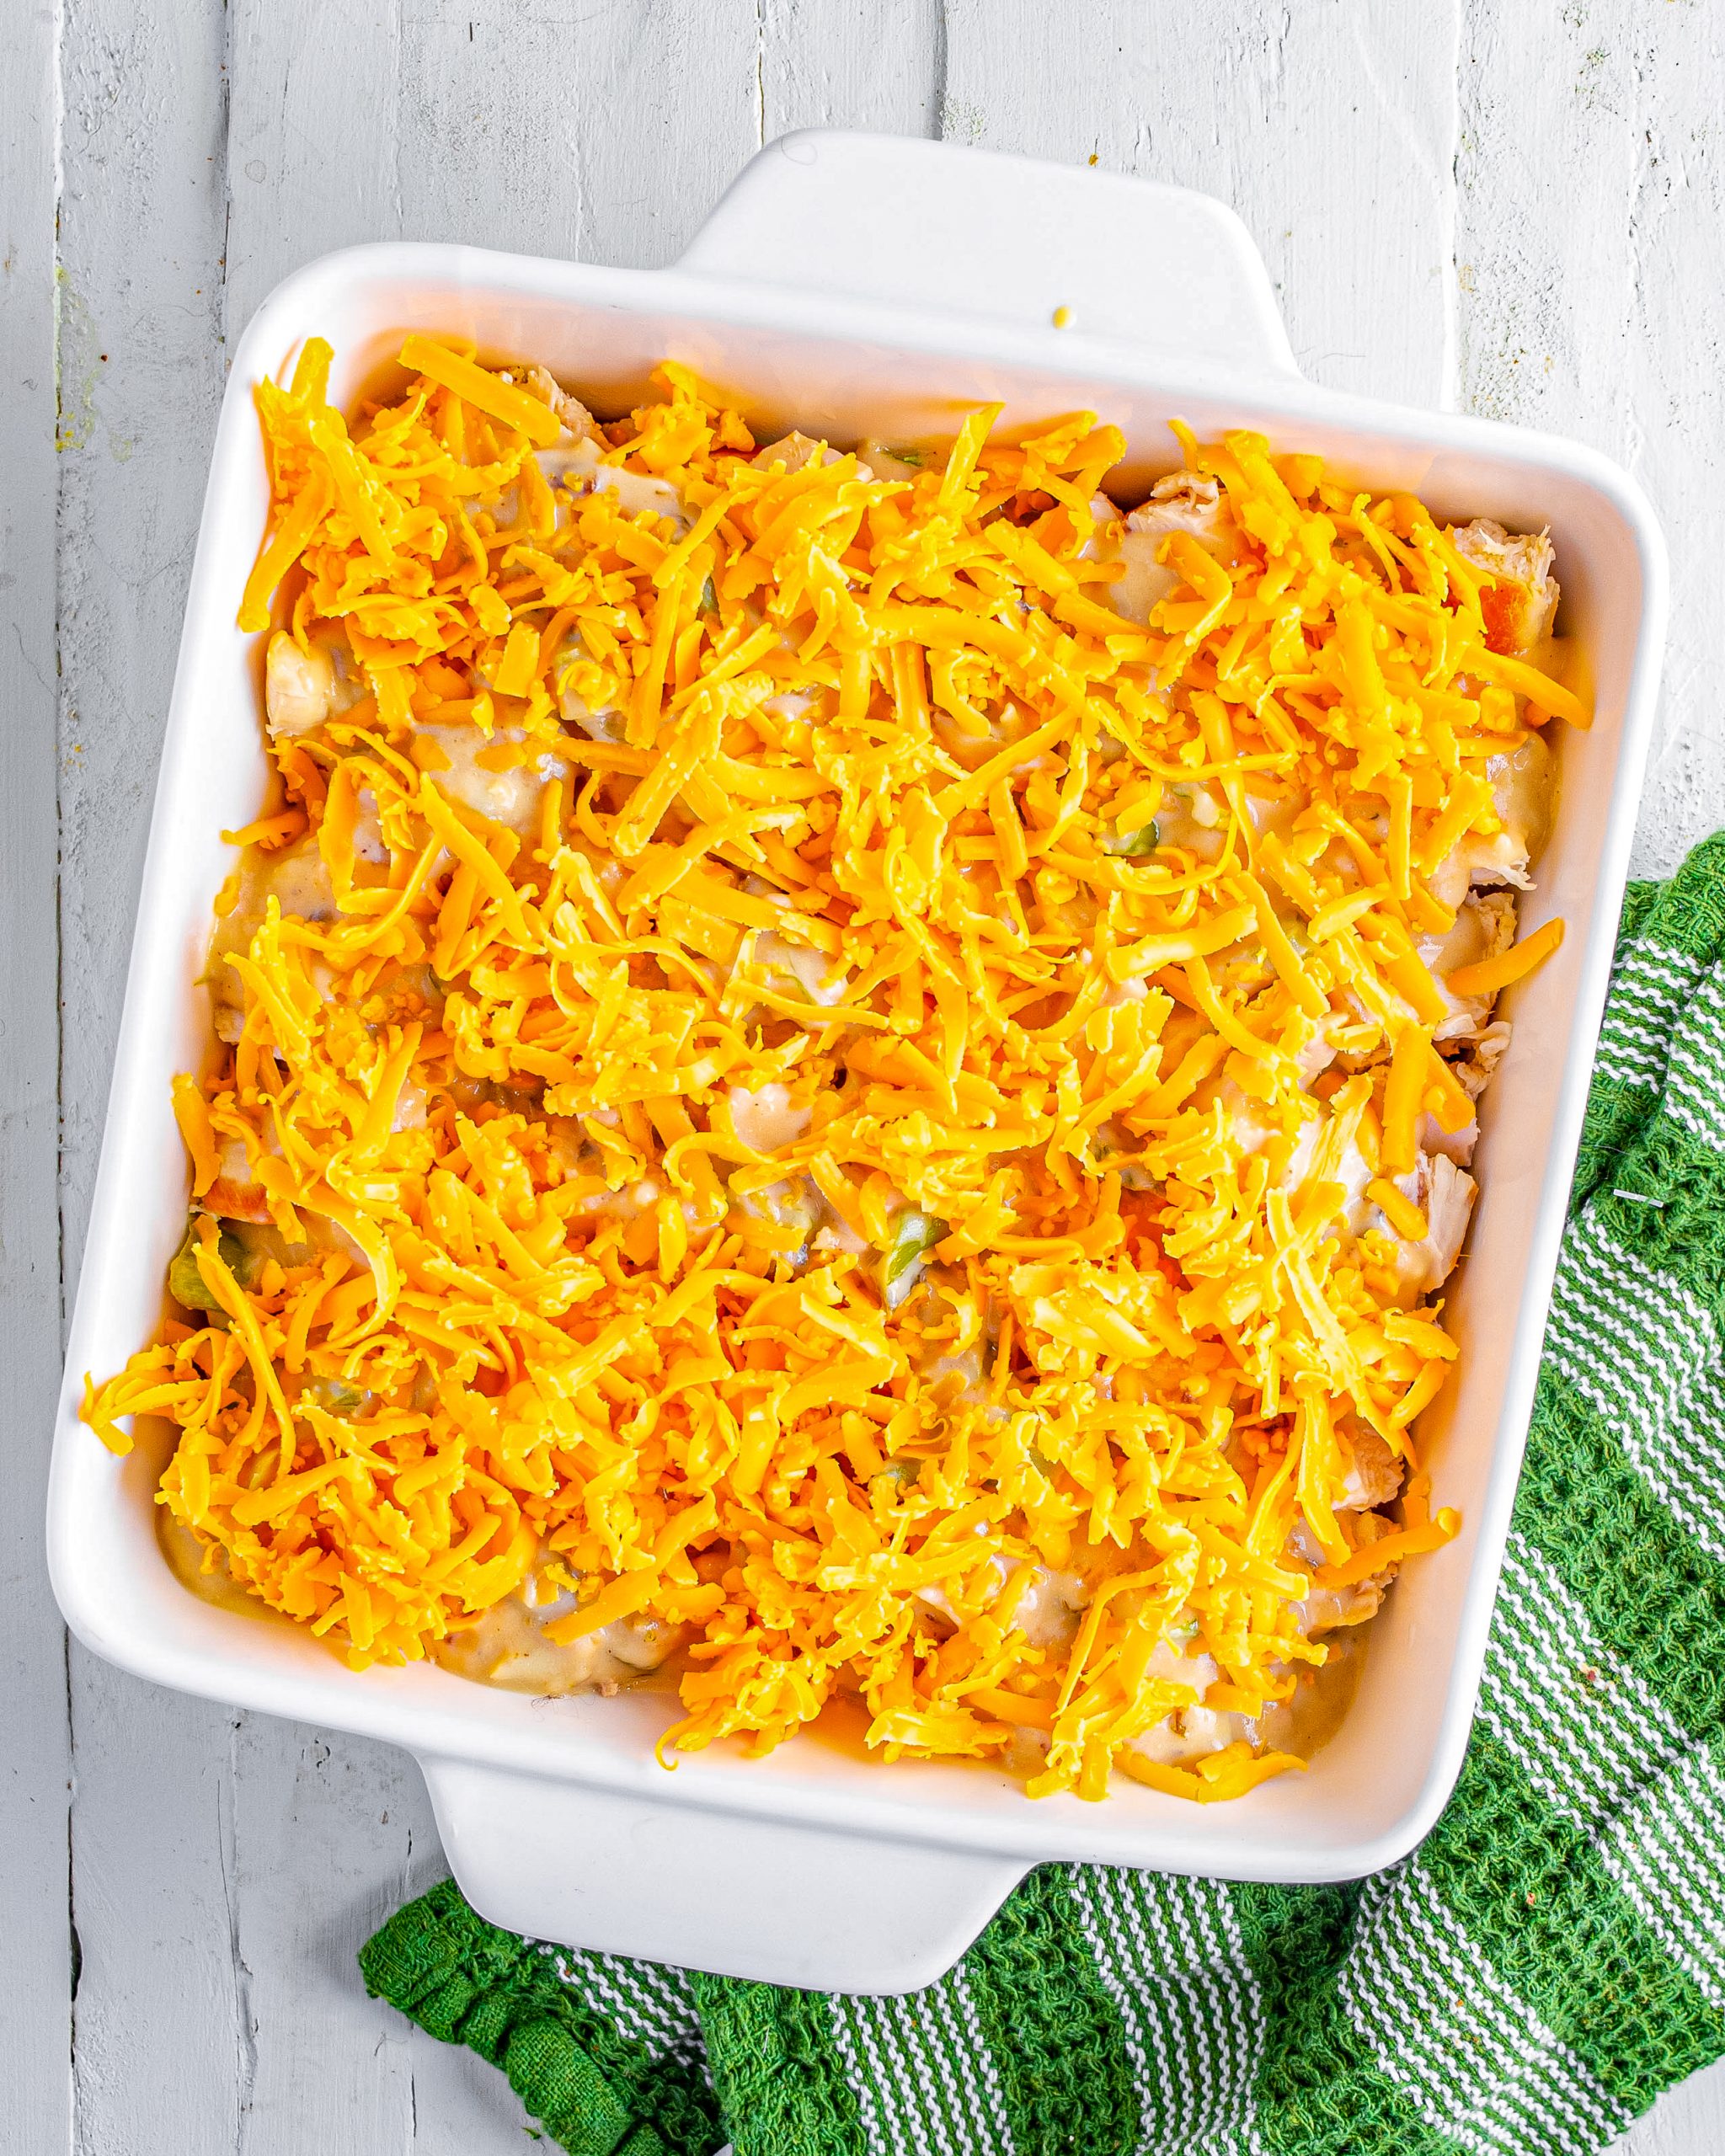 Layer the cheddar cheese on top. 